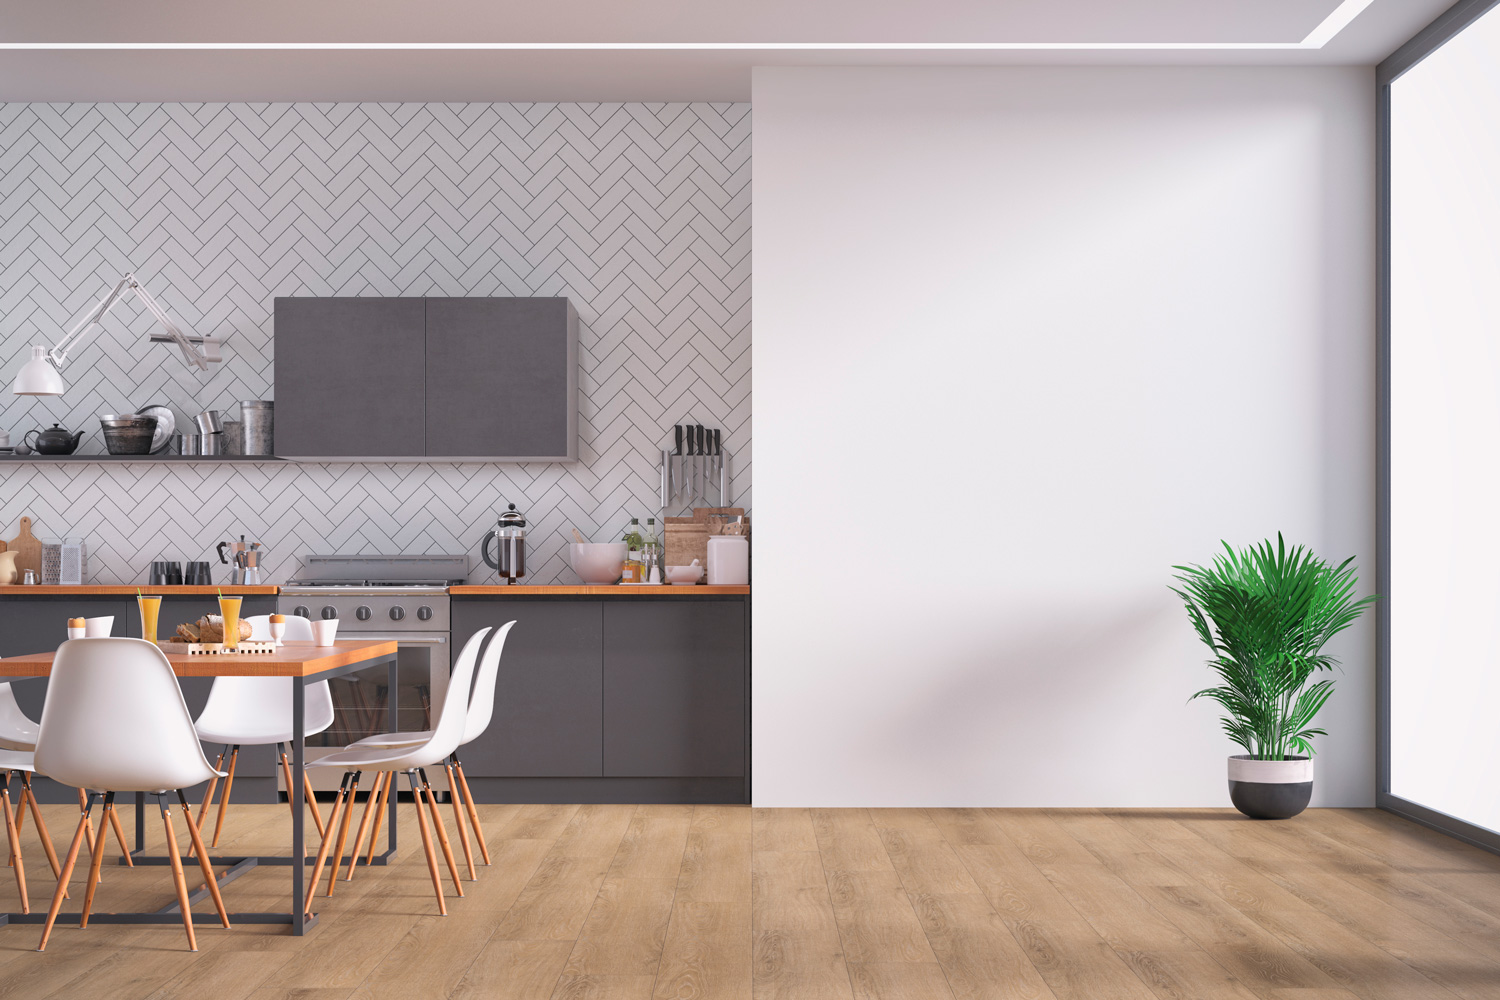 Empty anthracite modern kitchen on hardwood floor with appliances, full dining table, chairs in front of white herringbone tiled wall background. 